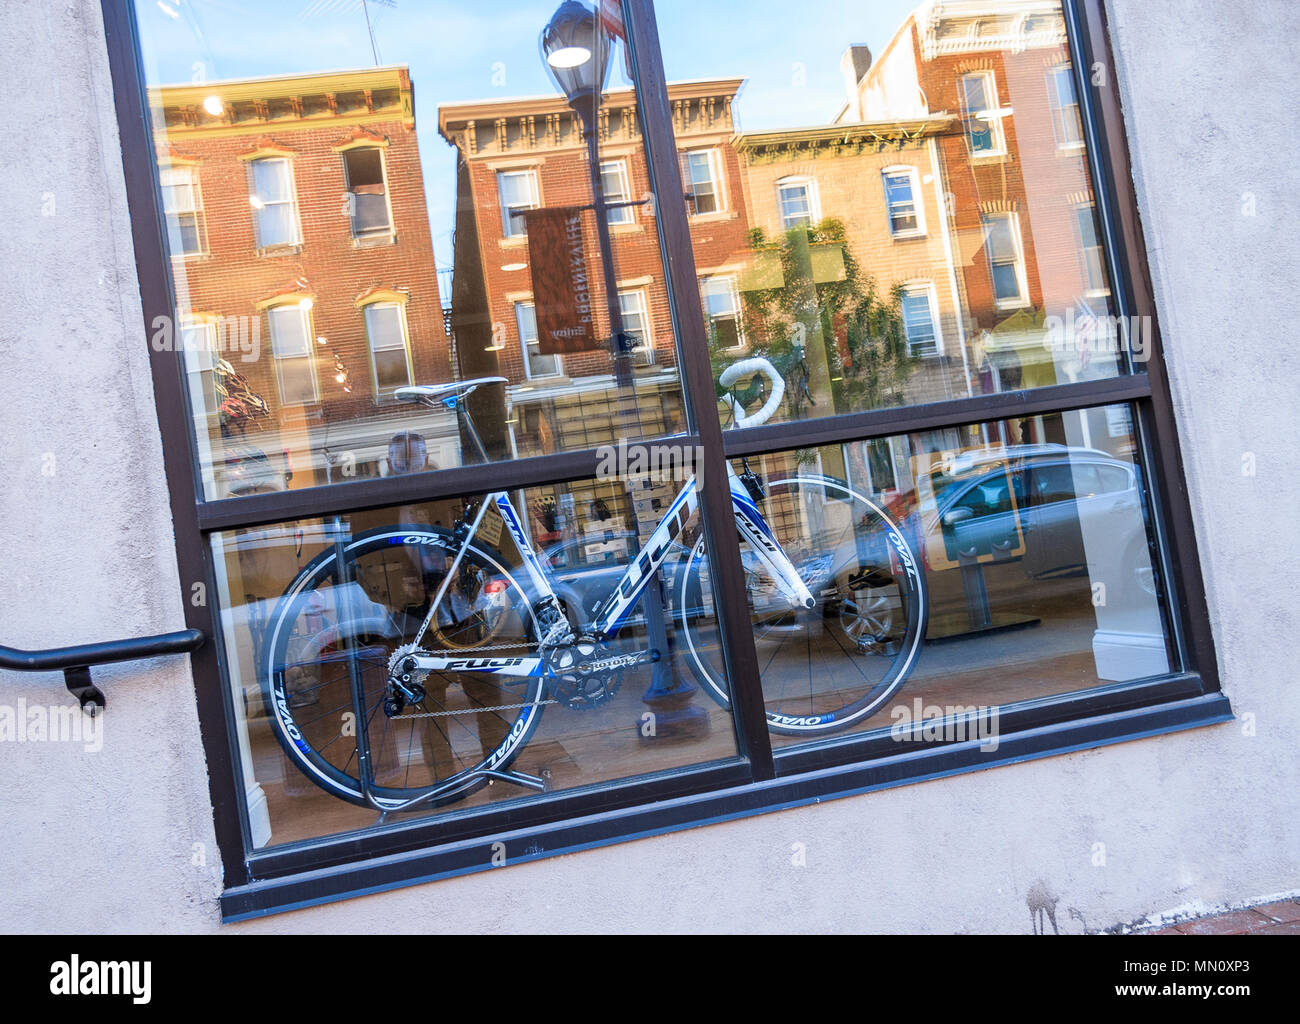 Bicycle in store window with reflections Stock Photo